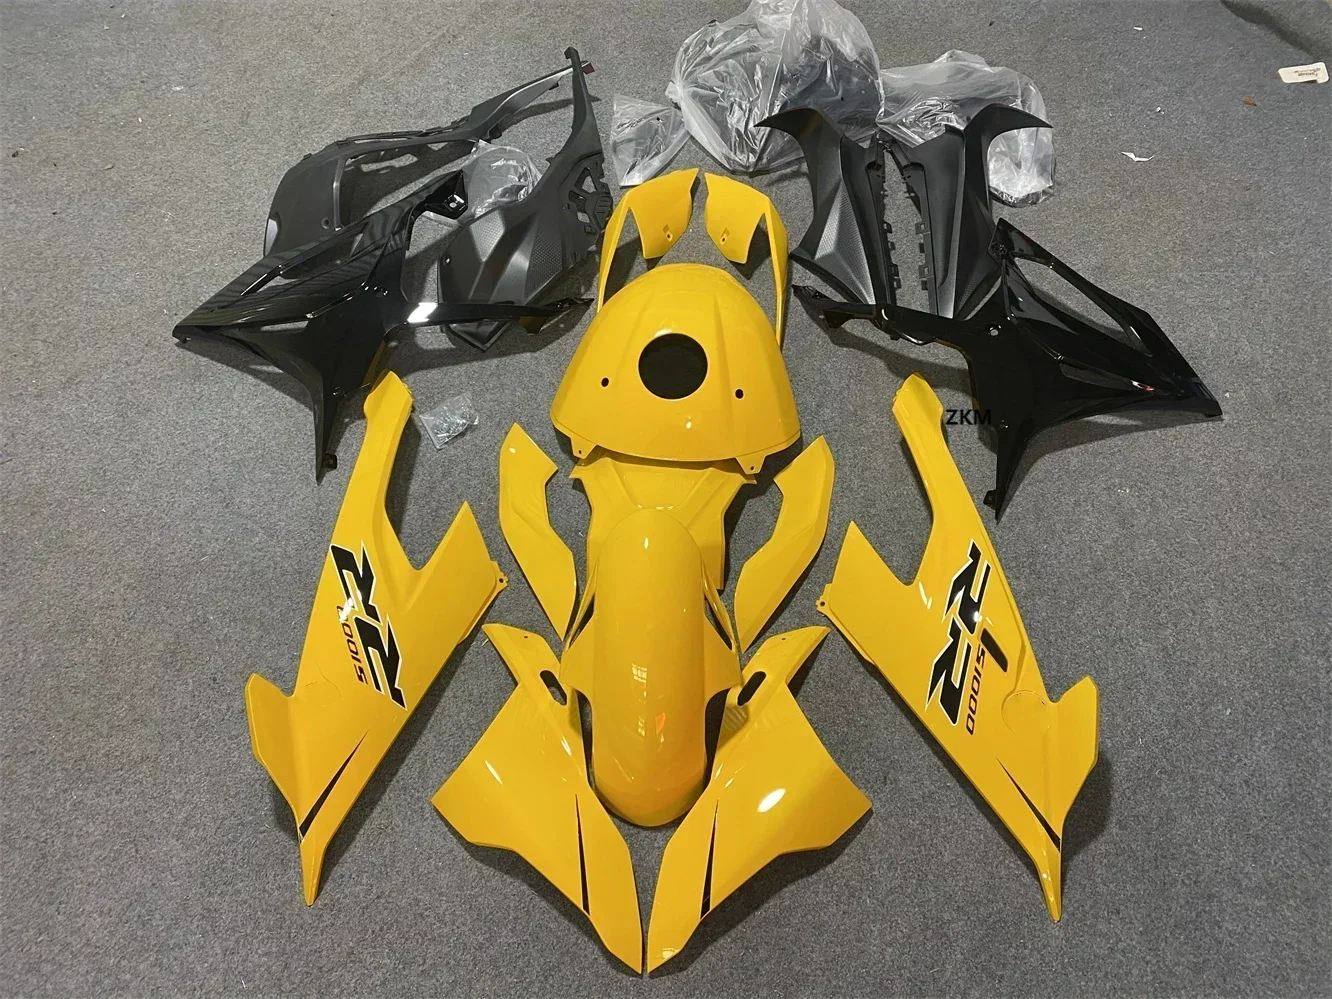 

Motorcycle Fairing Kit for S1000RR 19-22 Years S1000 2019 2020 2021 2022 Fairing yellow